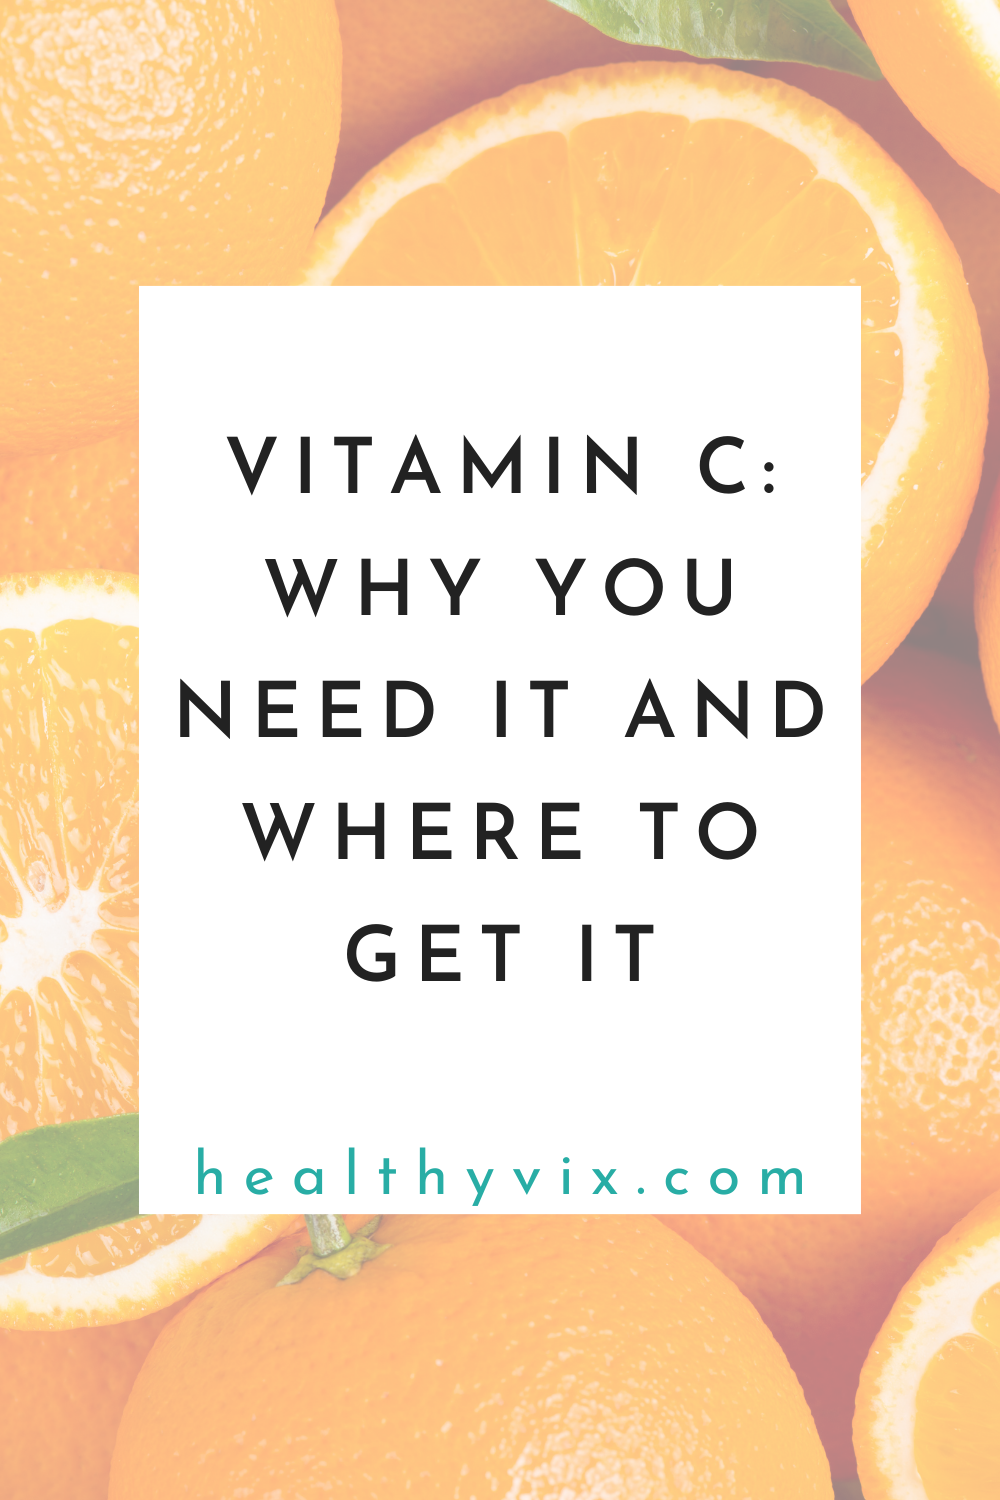 Vitamin C: why you need it and where to get it